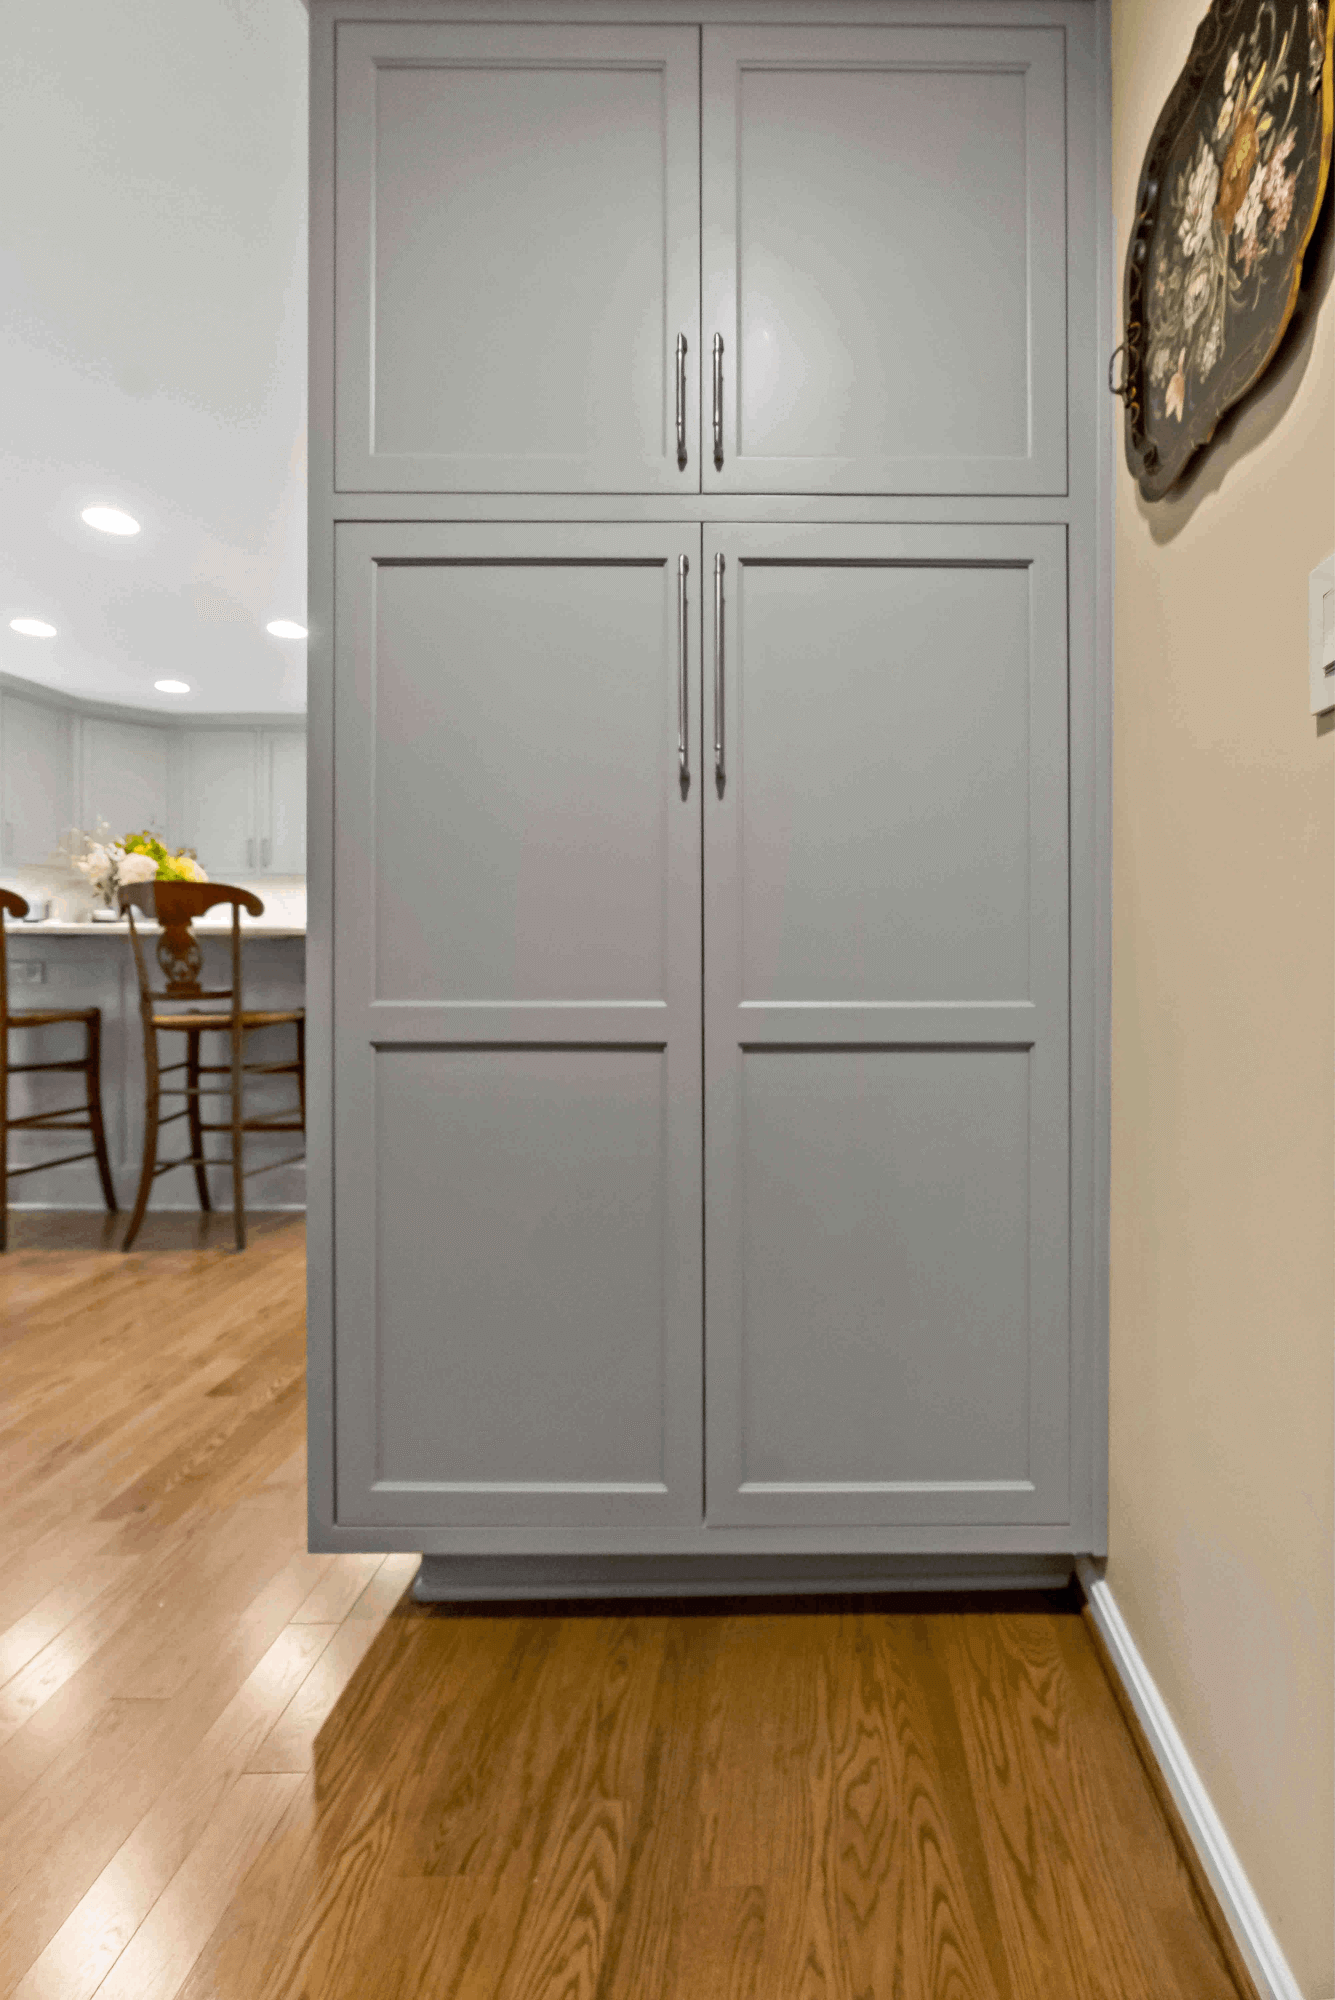 Light grey tall cabinets in kitchen remodel